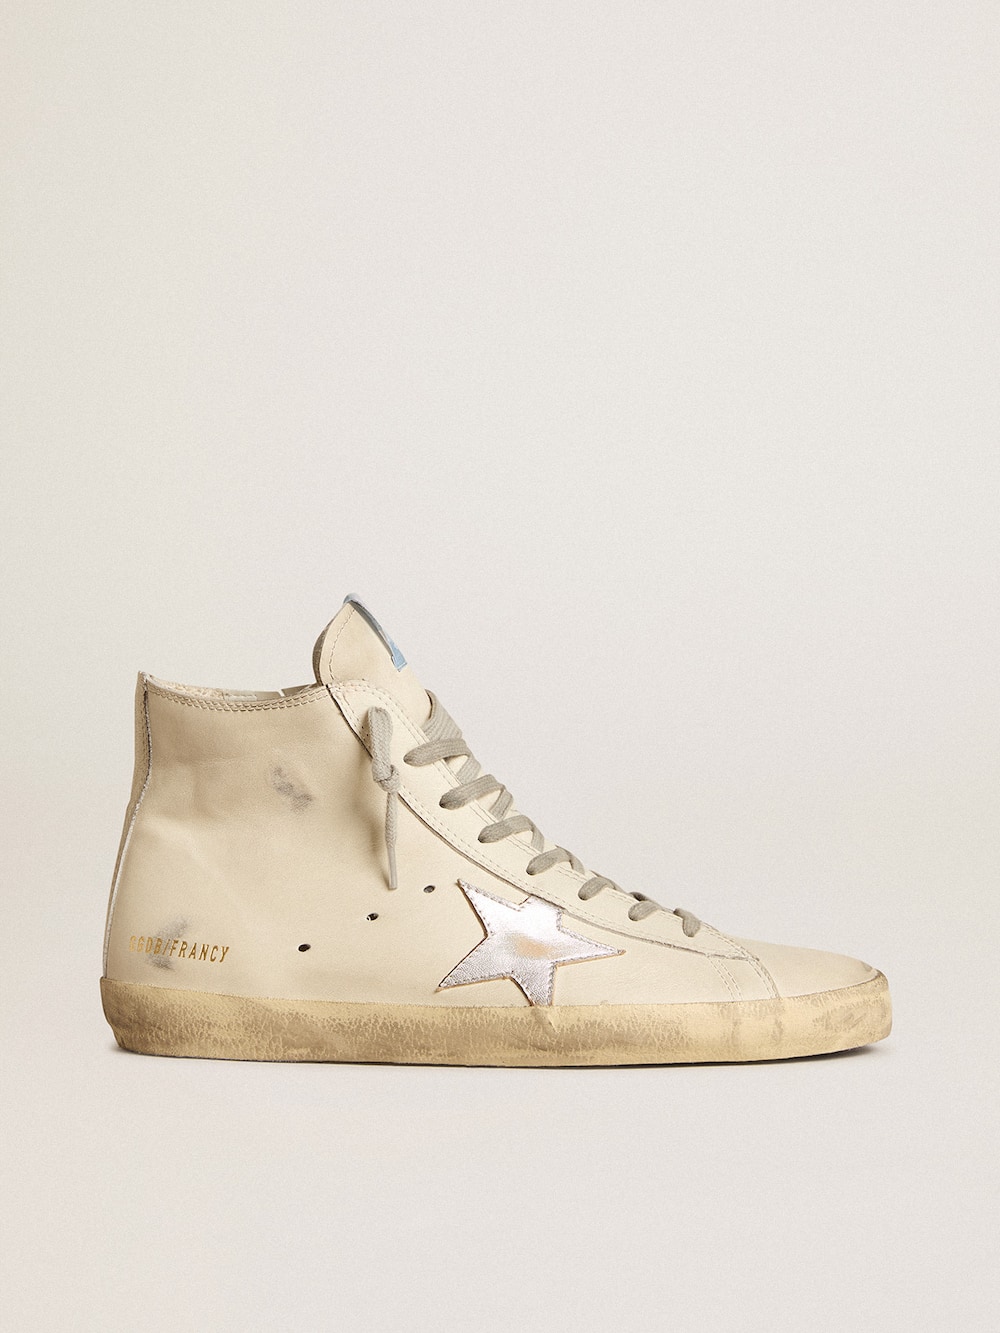 Golden Goose - Francy Penstar in white leather with silver metallic leather star in 